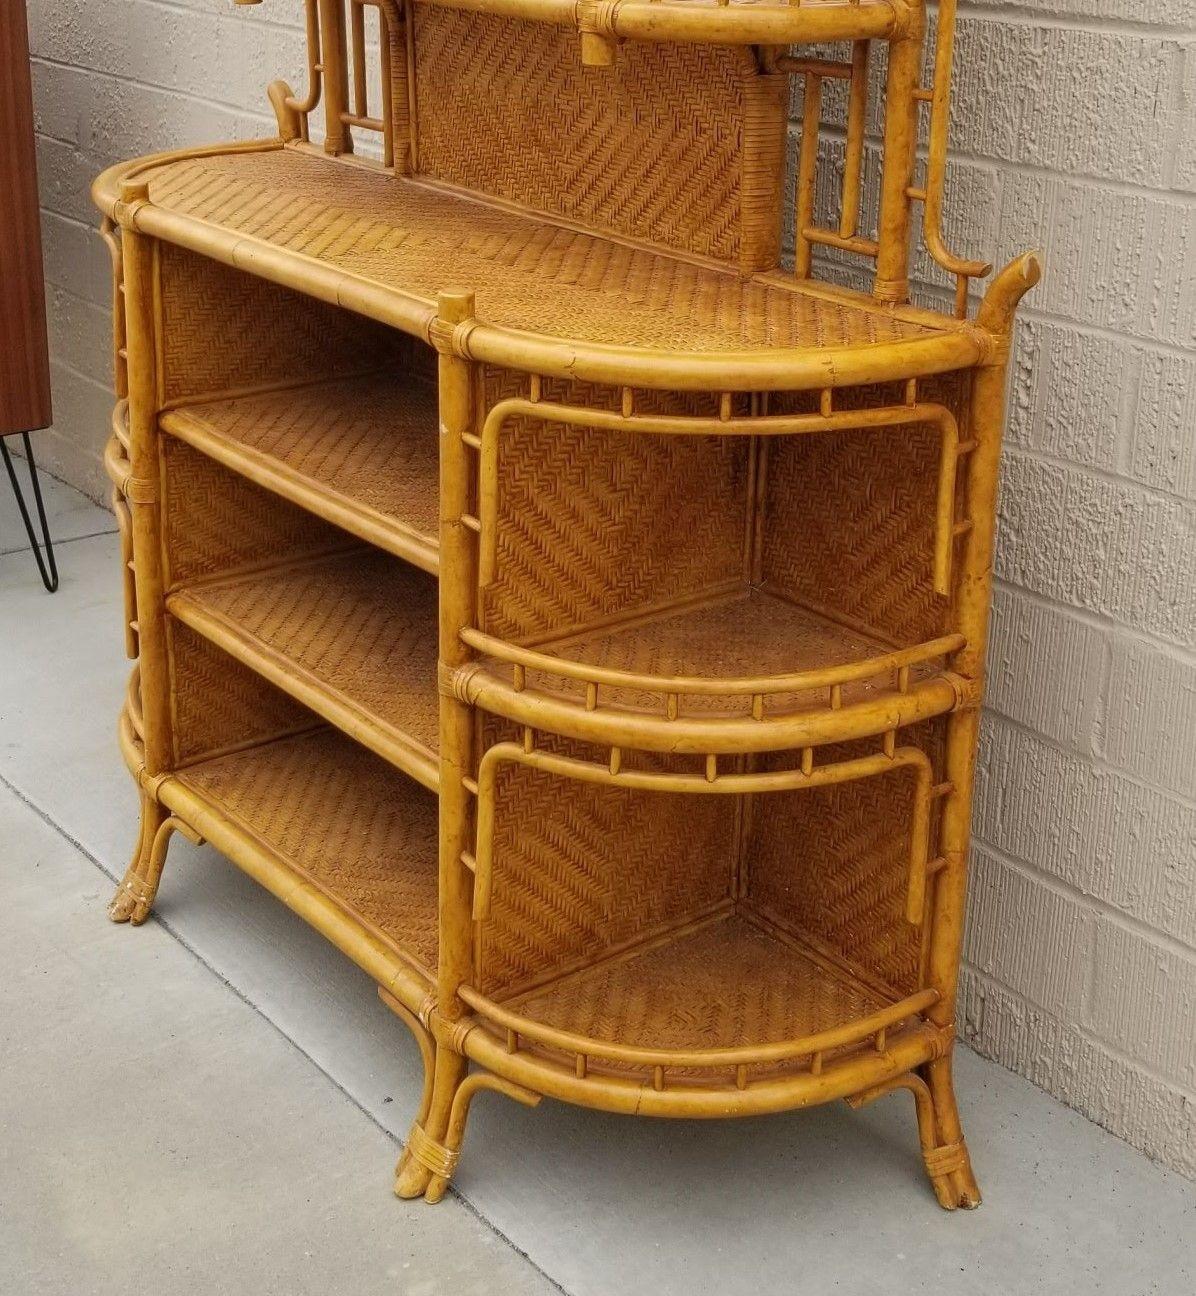 Restored Rattan Wicker , Book Shelf w/ Mirror By Maitland Smith In Excellent Condition For Sale In Van Nuys, CA